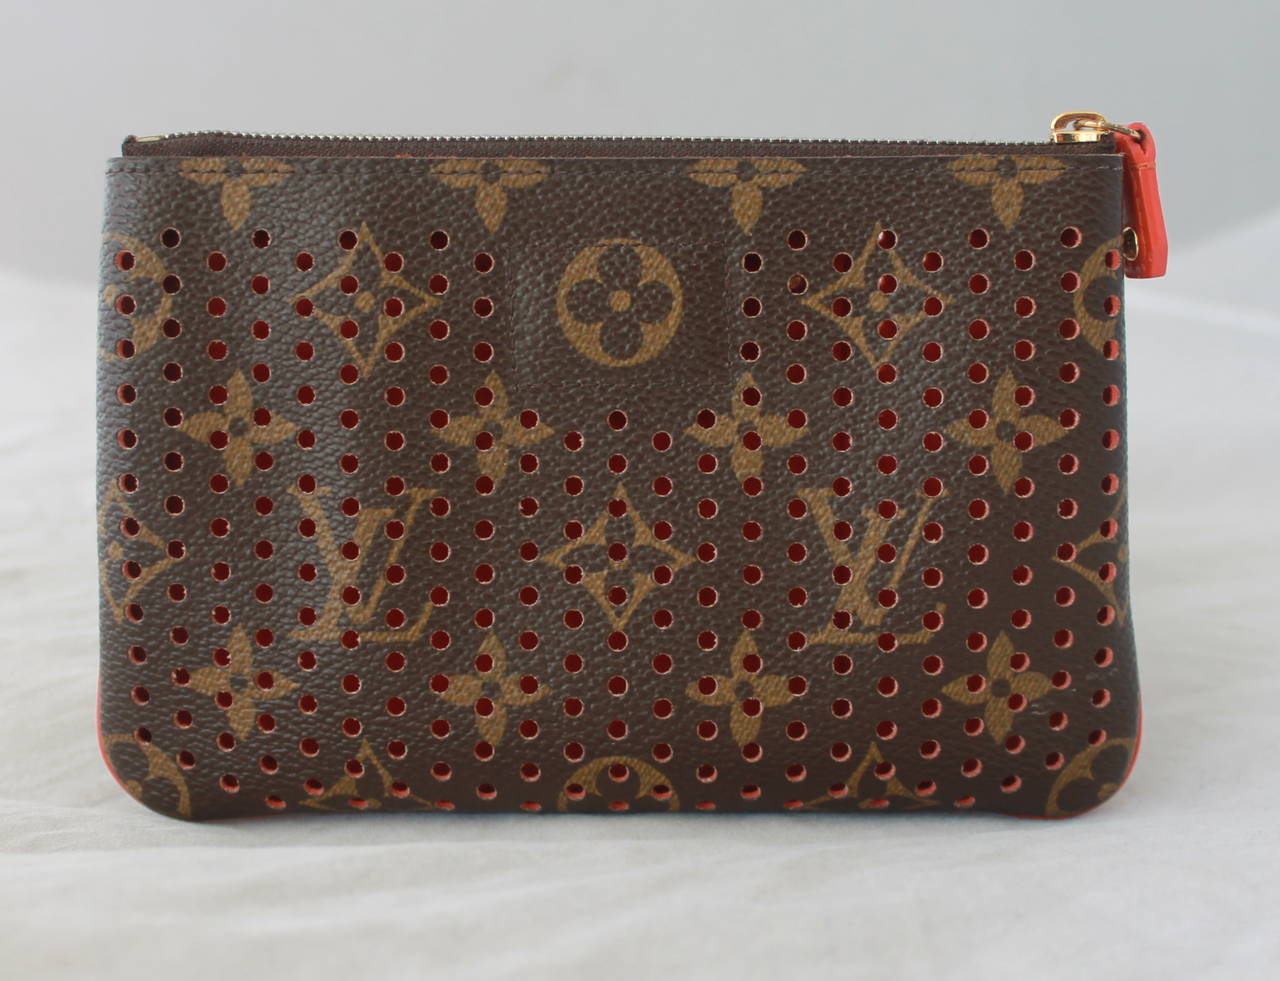 Louis Vuitton 2001 Perforated Brown & Red-Orange Monogram Case. This case is in very good condition with the only issues being very slight wear on the inside and one pen mark seen on image 6. 

Height- 4.45